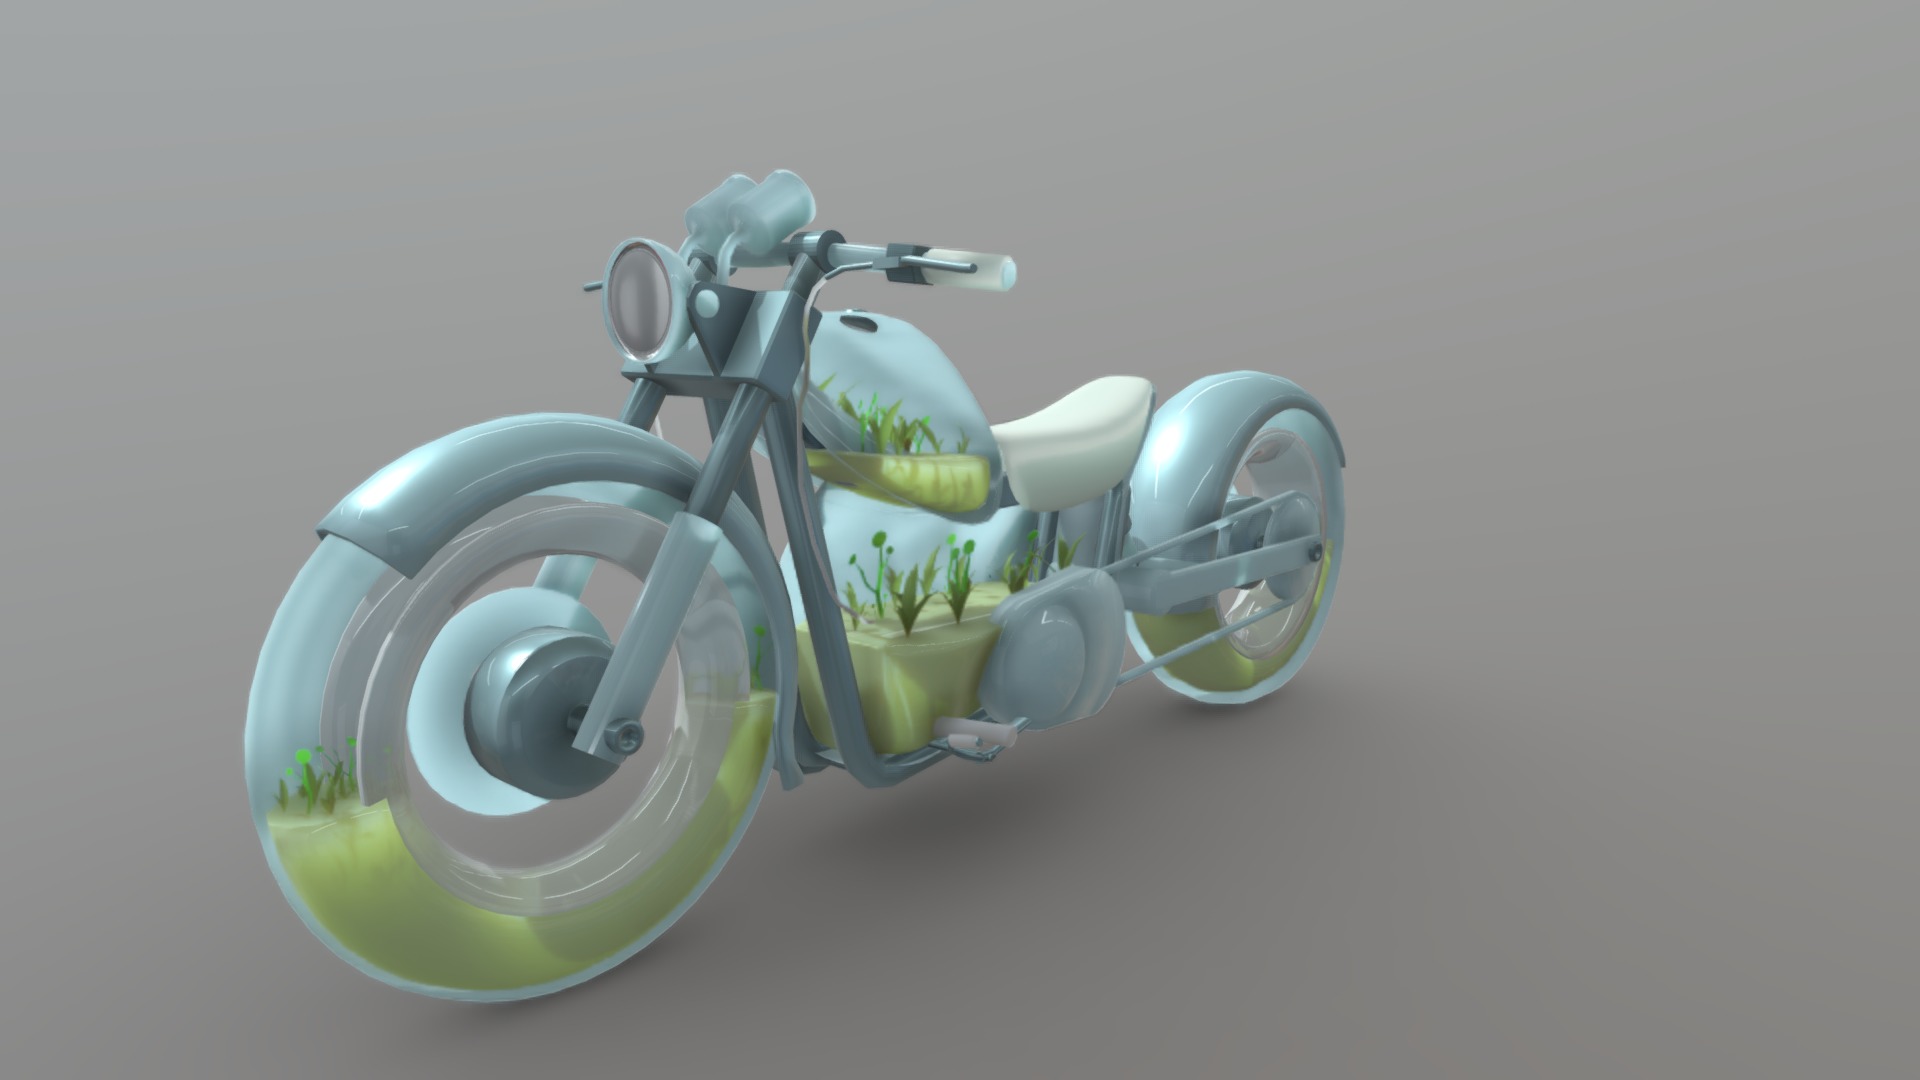 3D model Motorcycle Hydroponics - This is a 3D model of the Motorcycle Hydroponics. The 3D model is about a light bulb with a green stem.